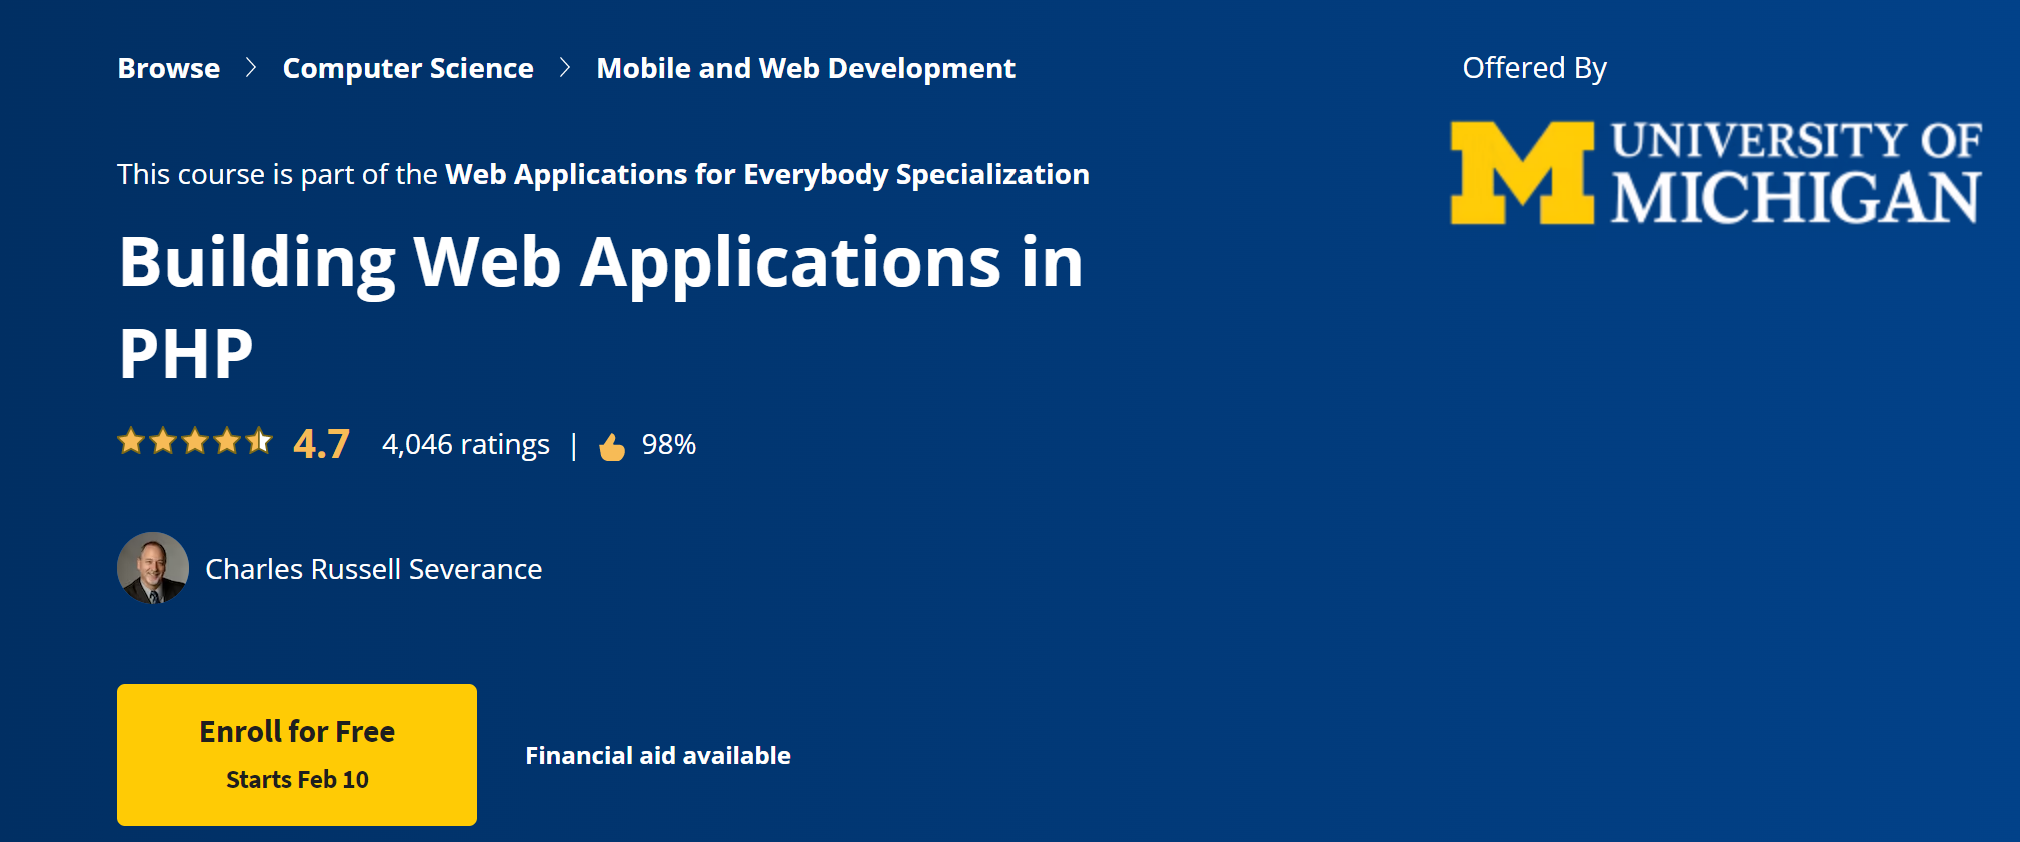 Building web applications in PHP